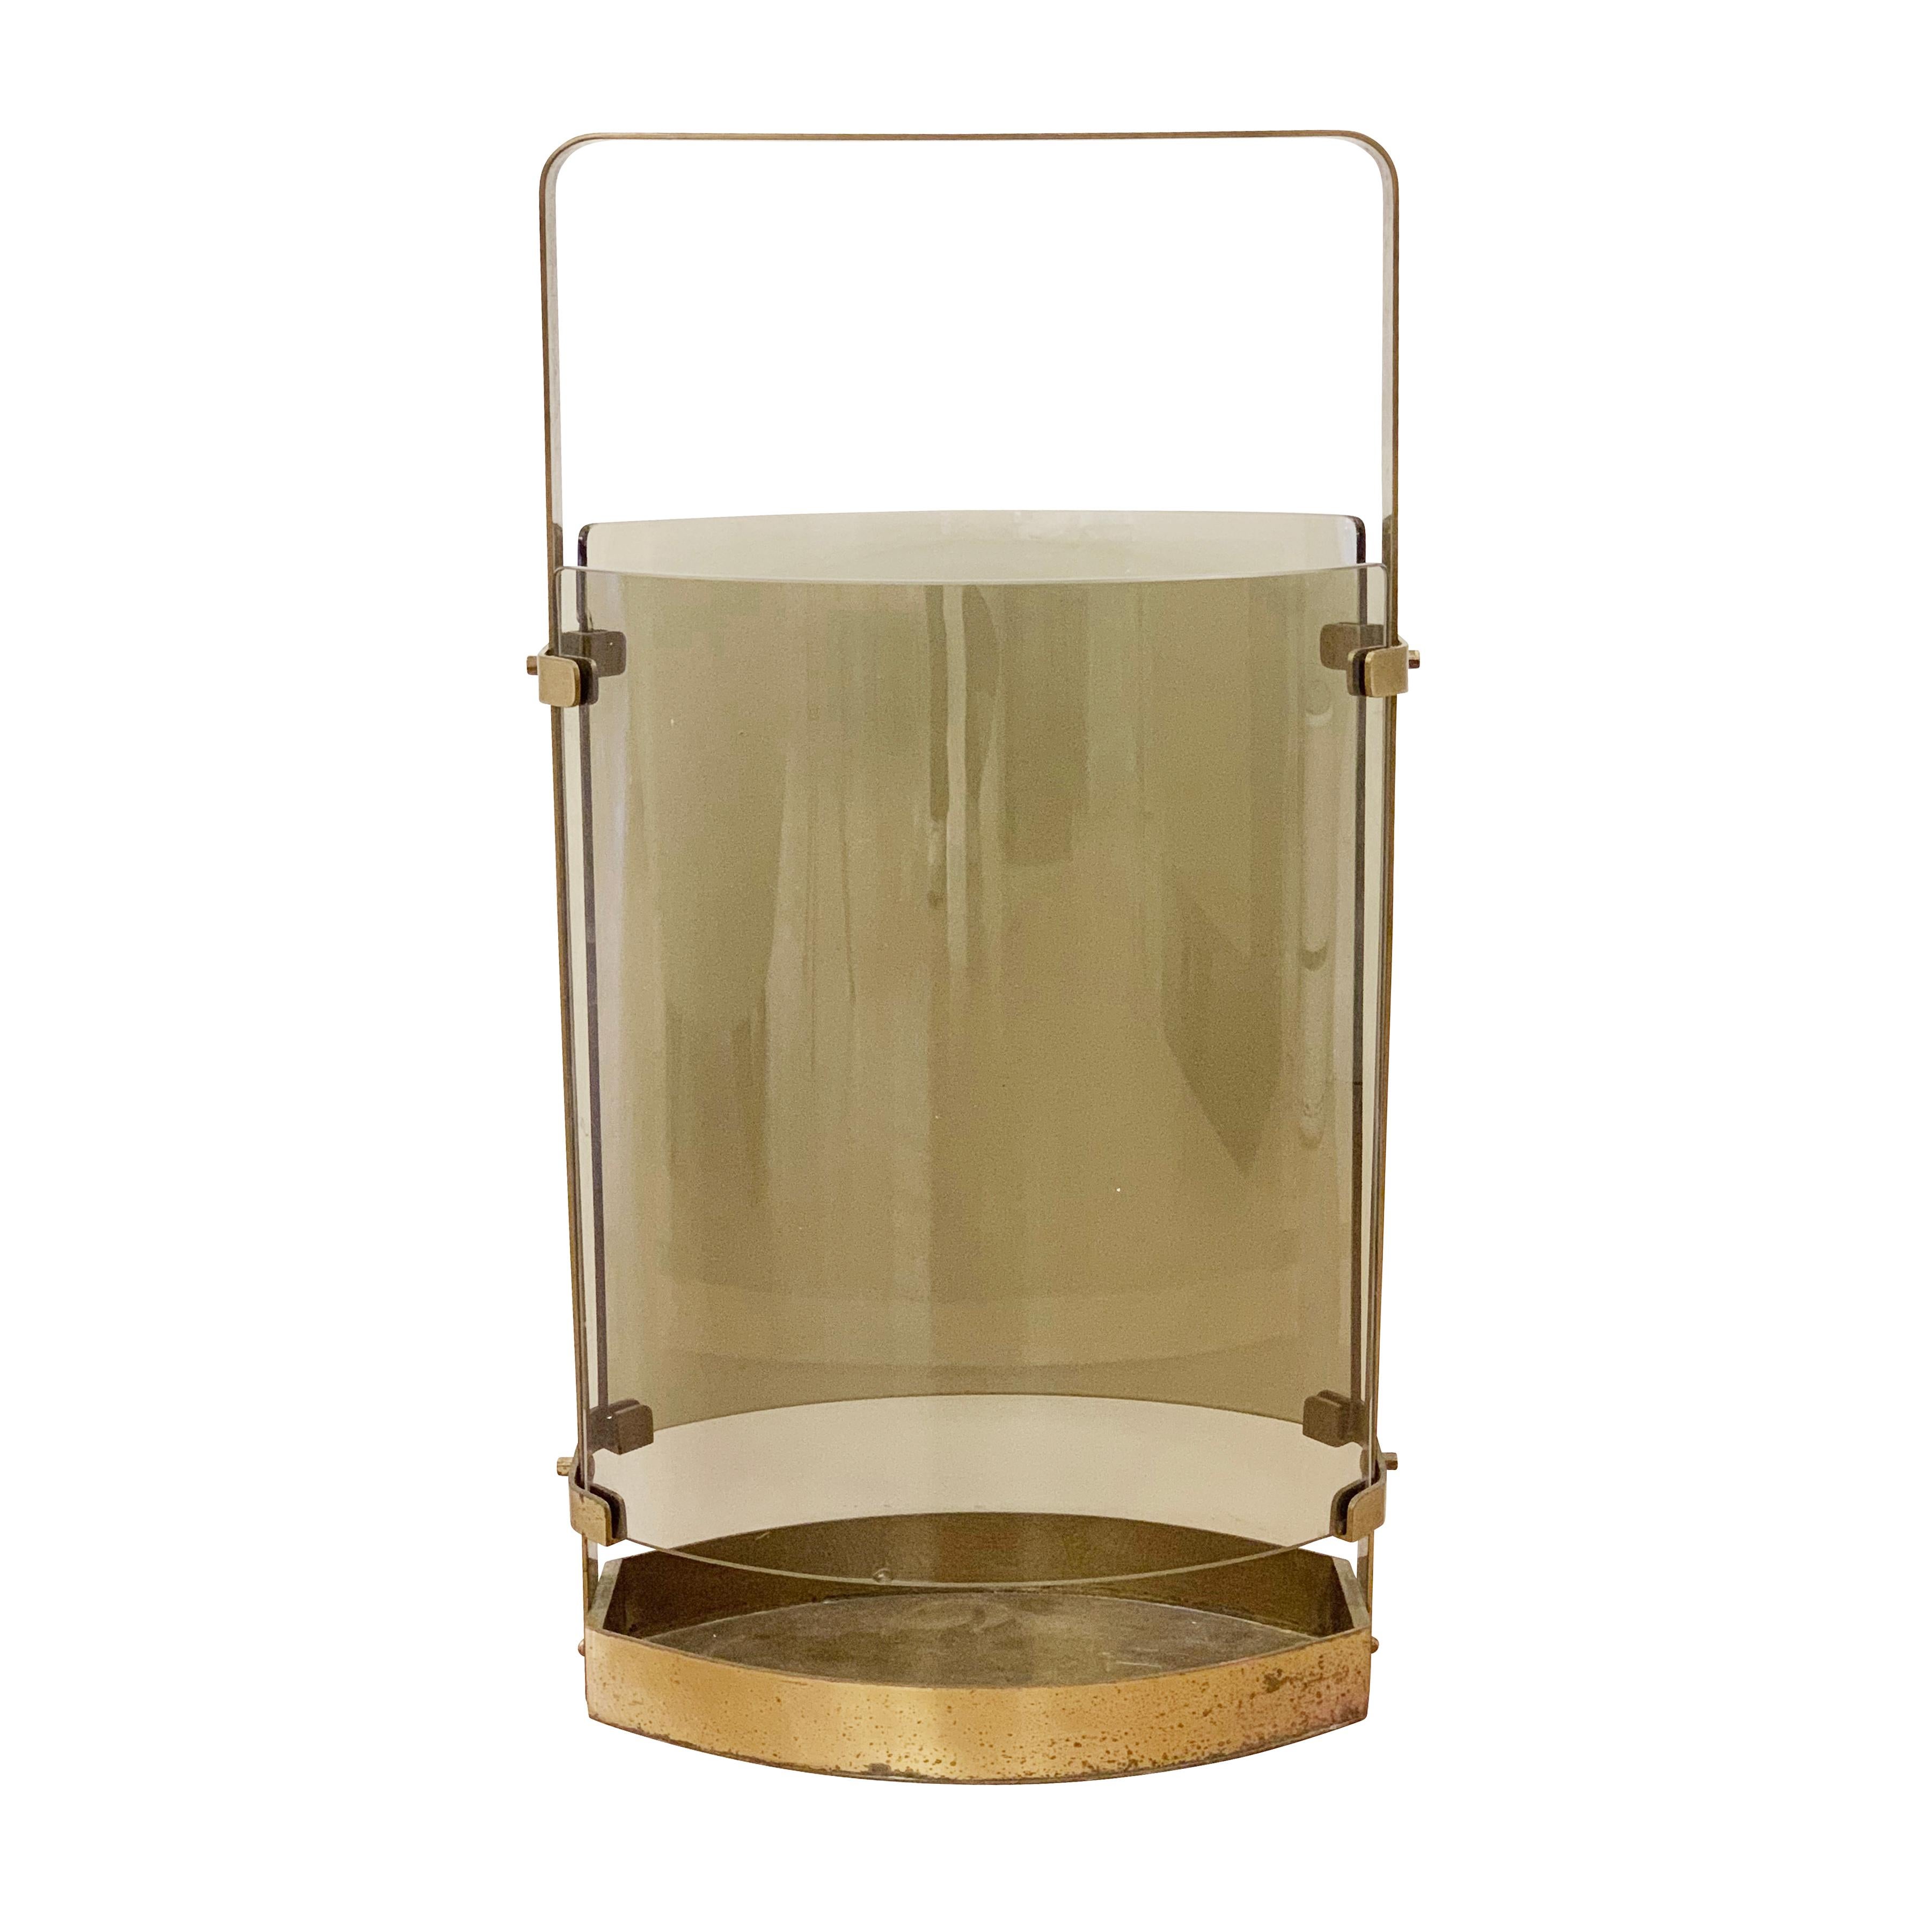 1960s umbrella stand by Fontana Arte with a brass frame and two curved smoked glasses. 

Condition: Vintage condition, some chips as shown and oxidation to the brass

Width: 14”

Depth: 9.5”

Height: 26”